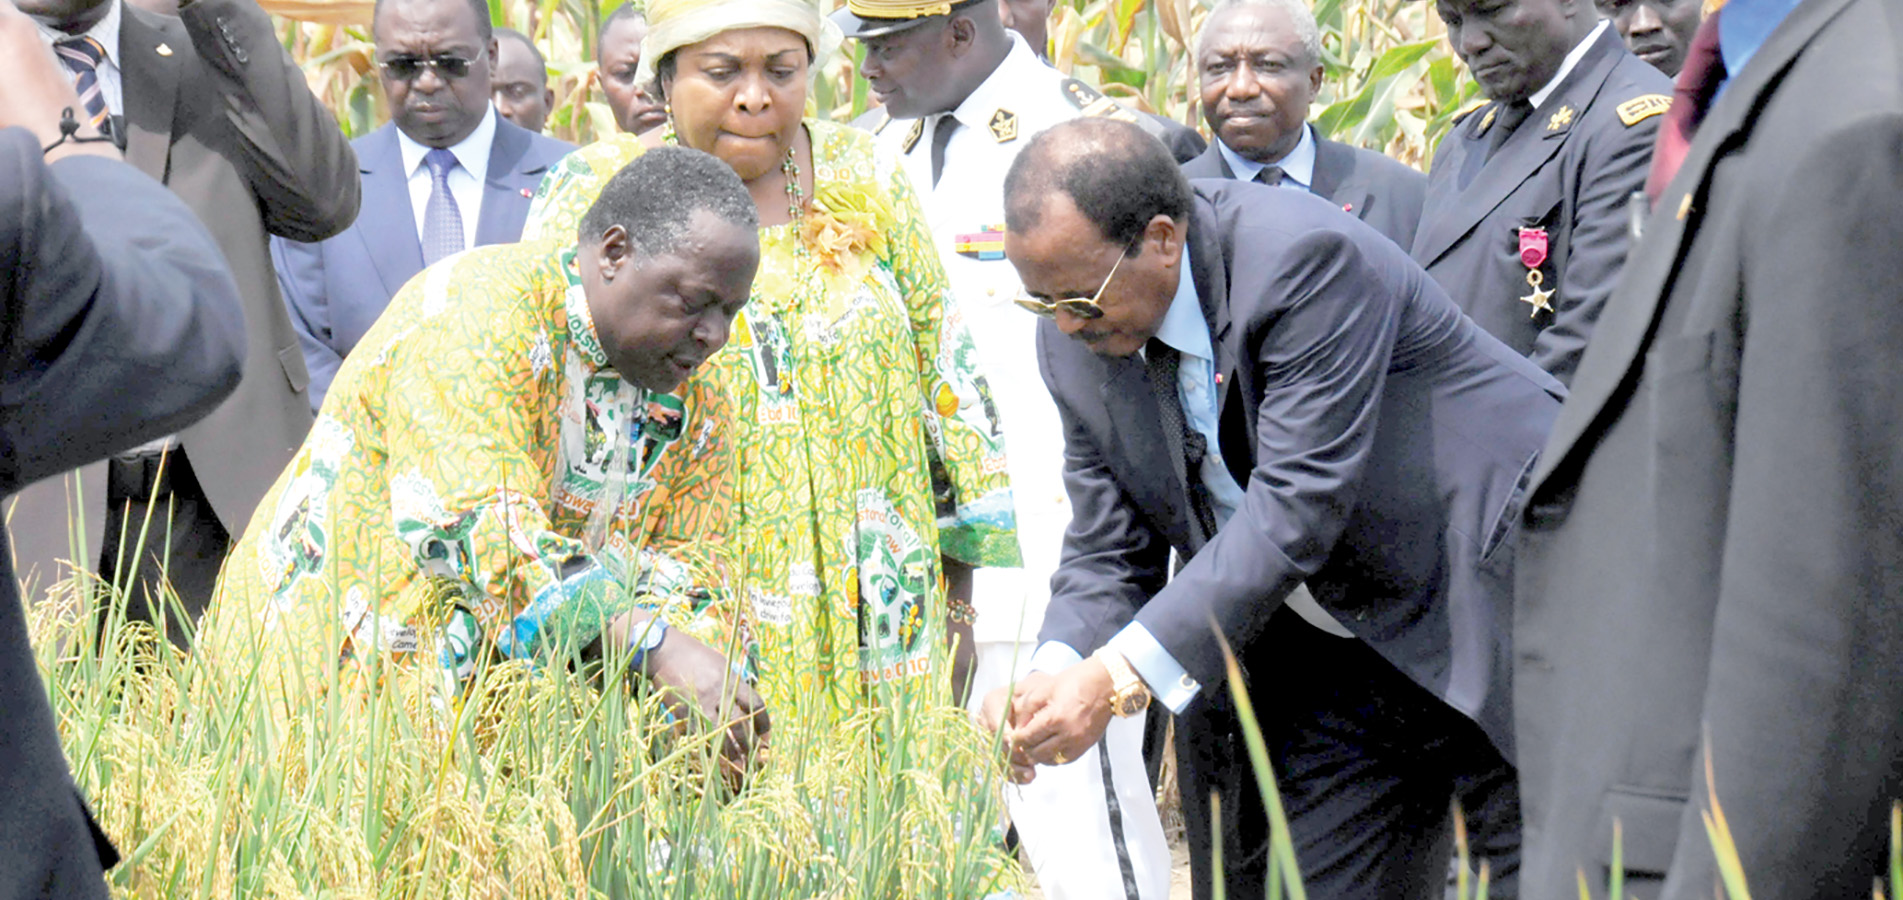 The President of the Republic at the Ebolowa Agropastoral Show